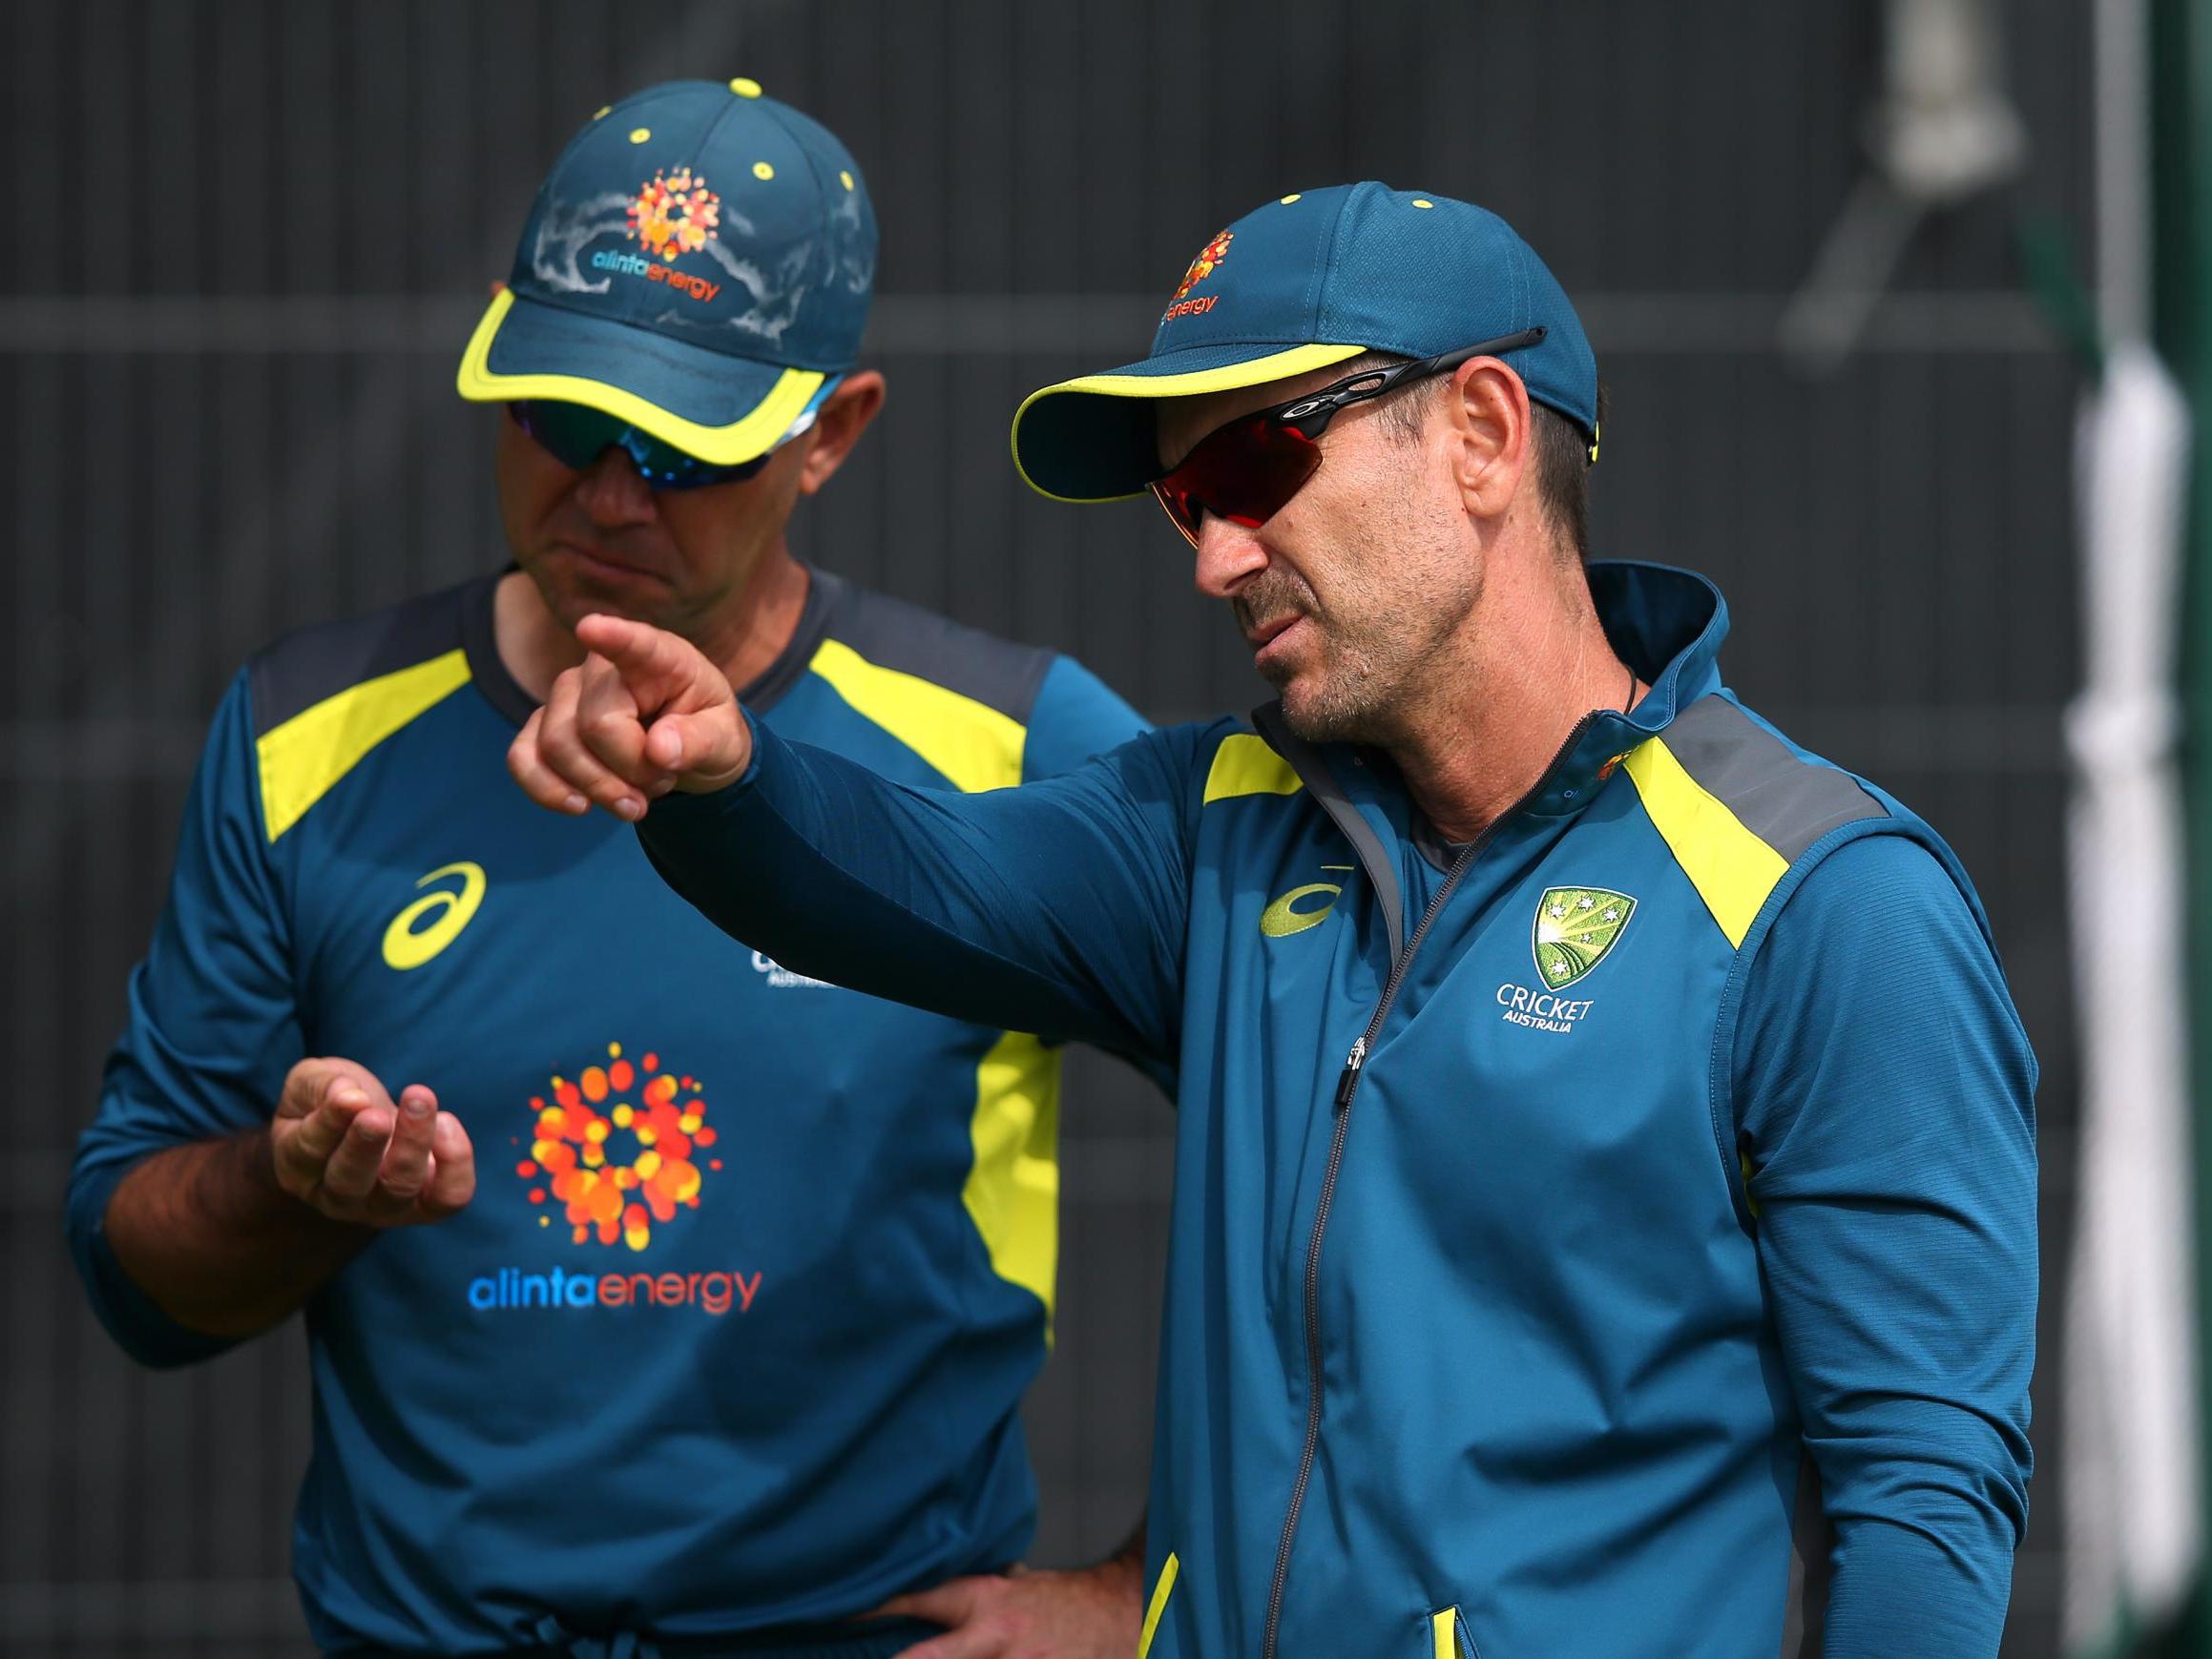 The Australia coach says tough nets sessions will be good for the team in match situations